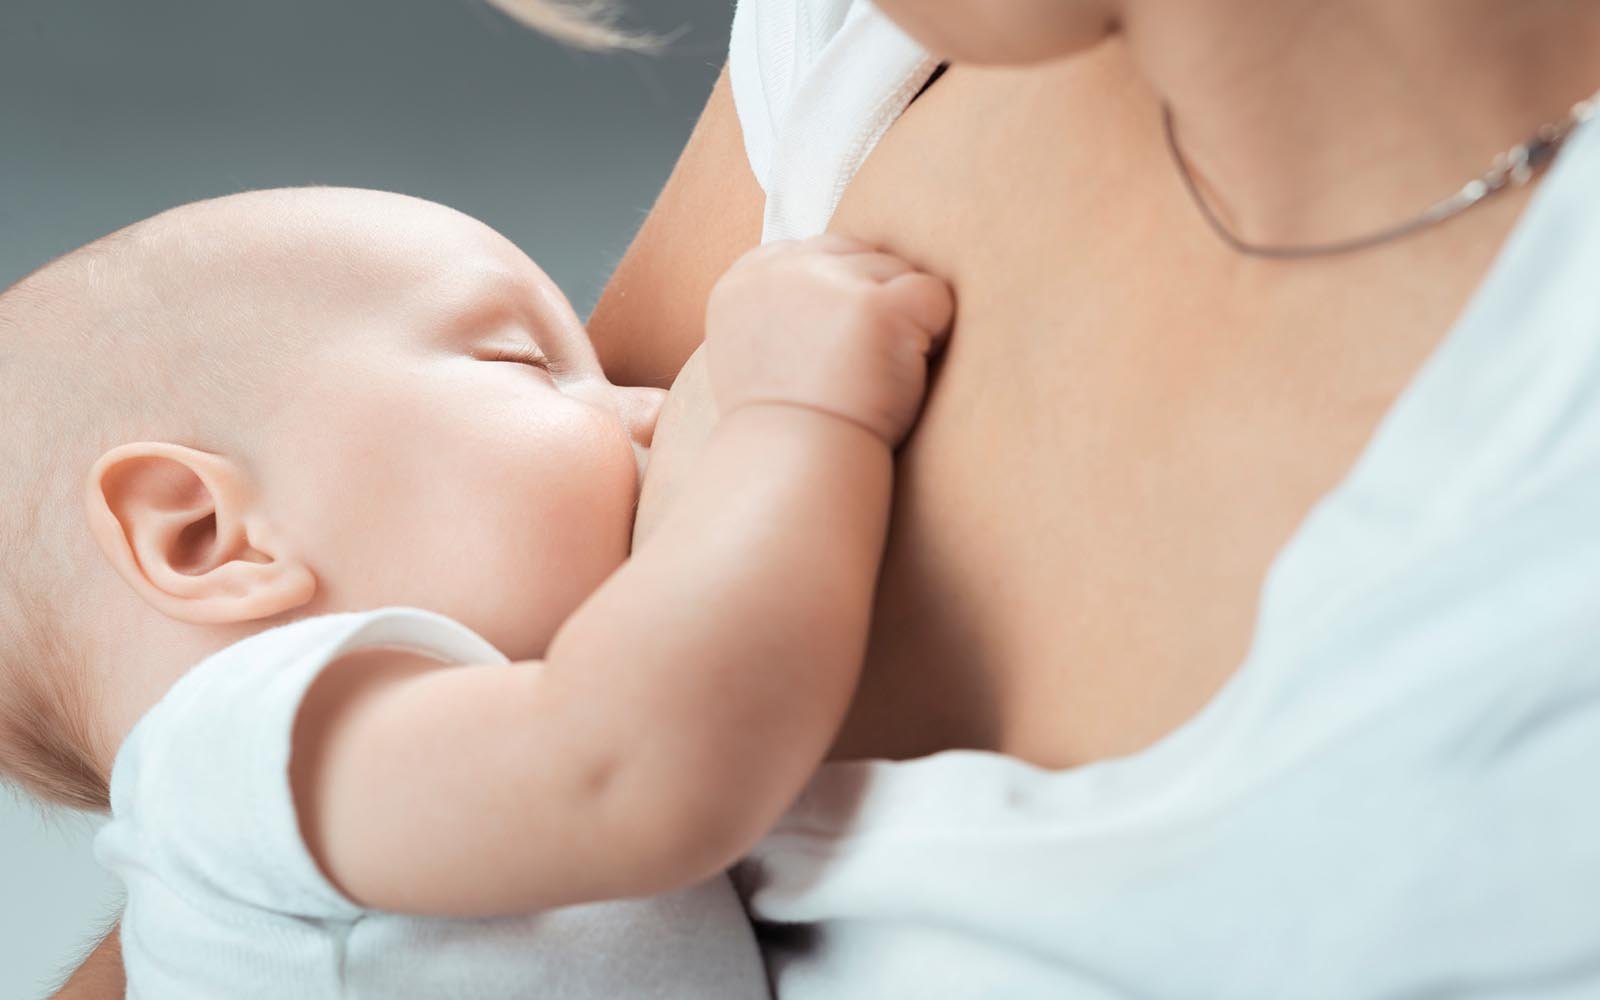 Breastfeeding: Benefits, Nutrition and General Advice